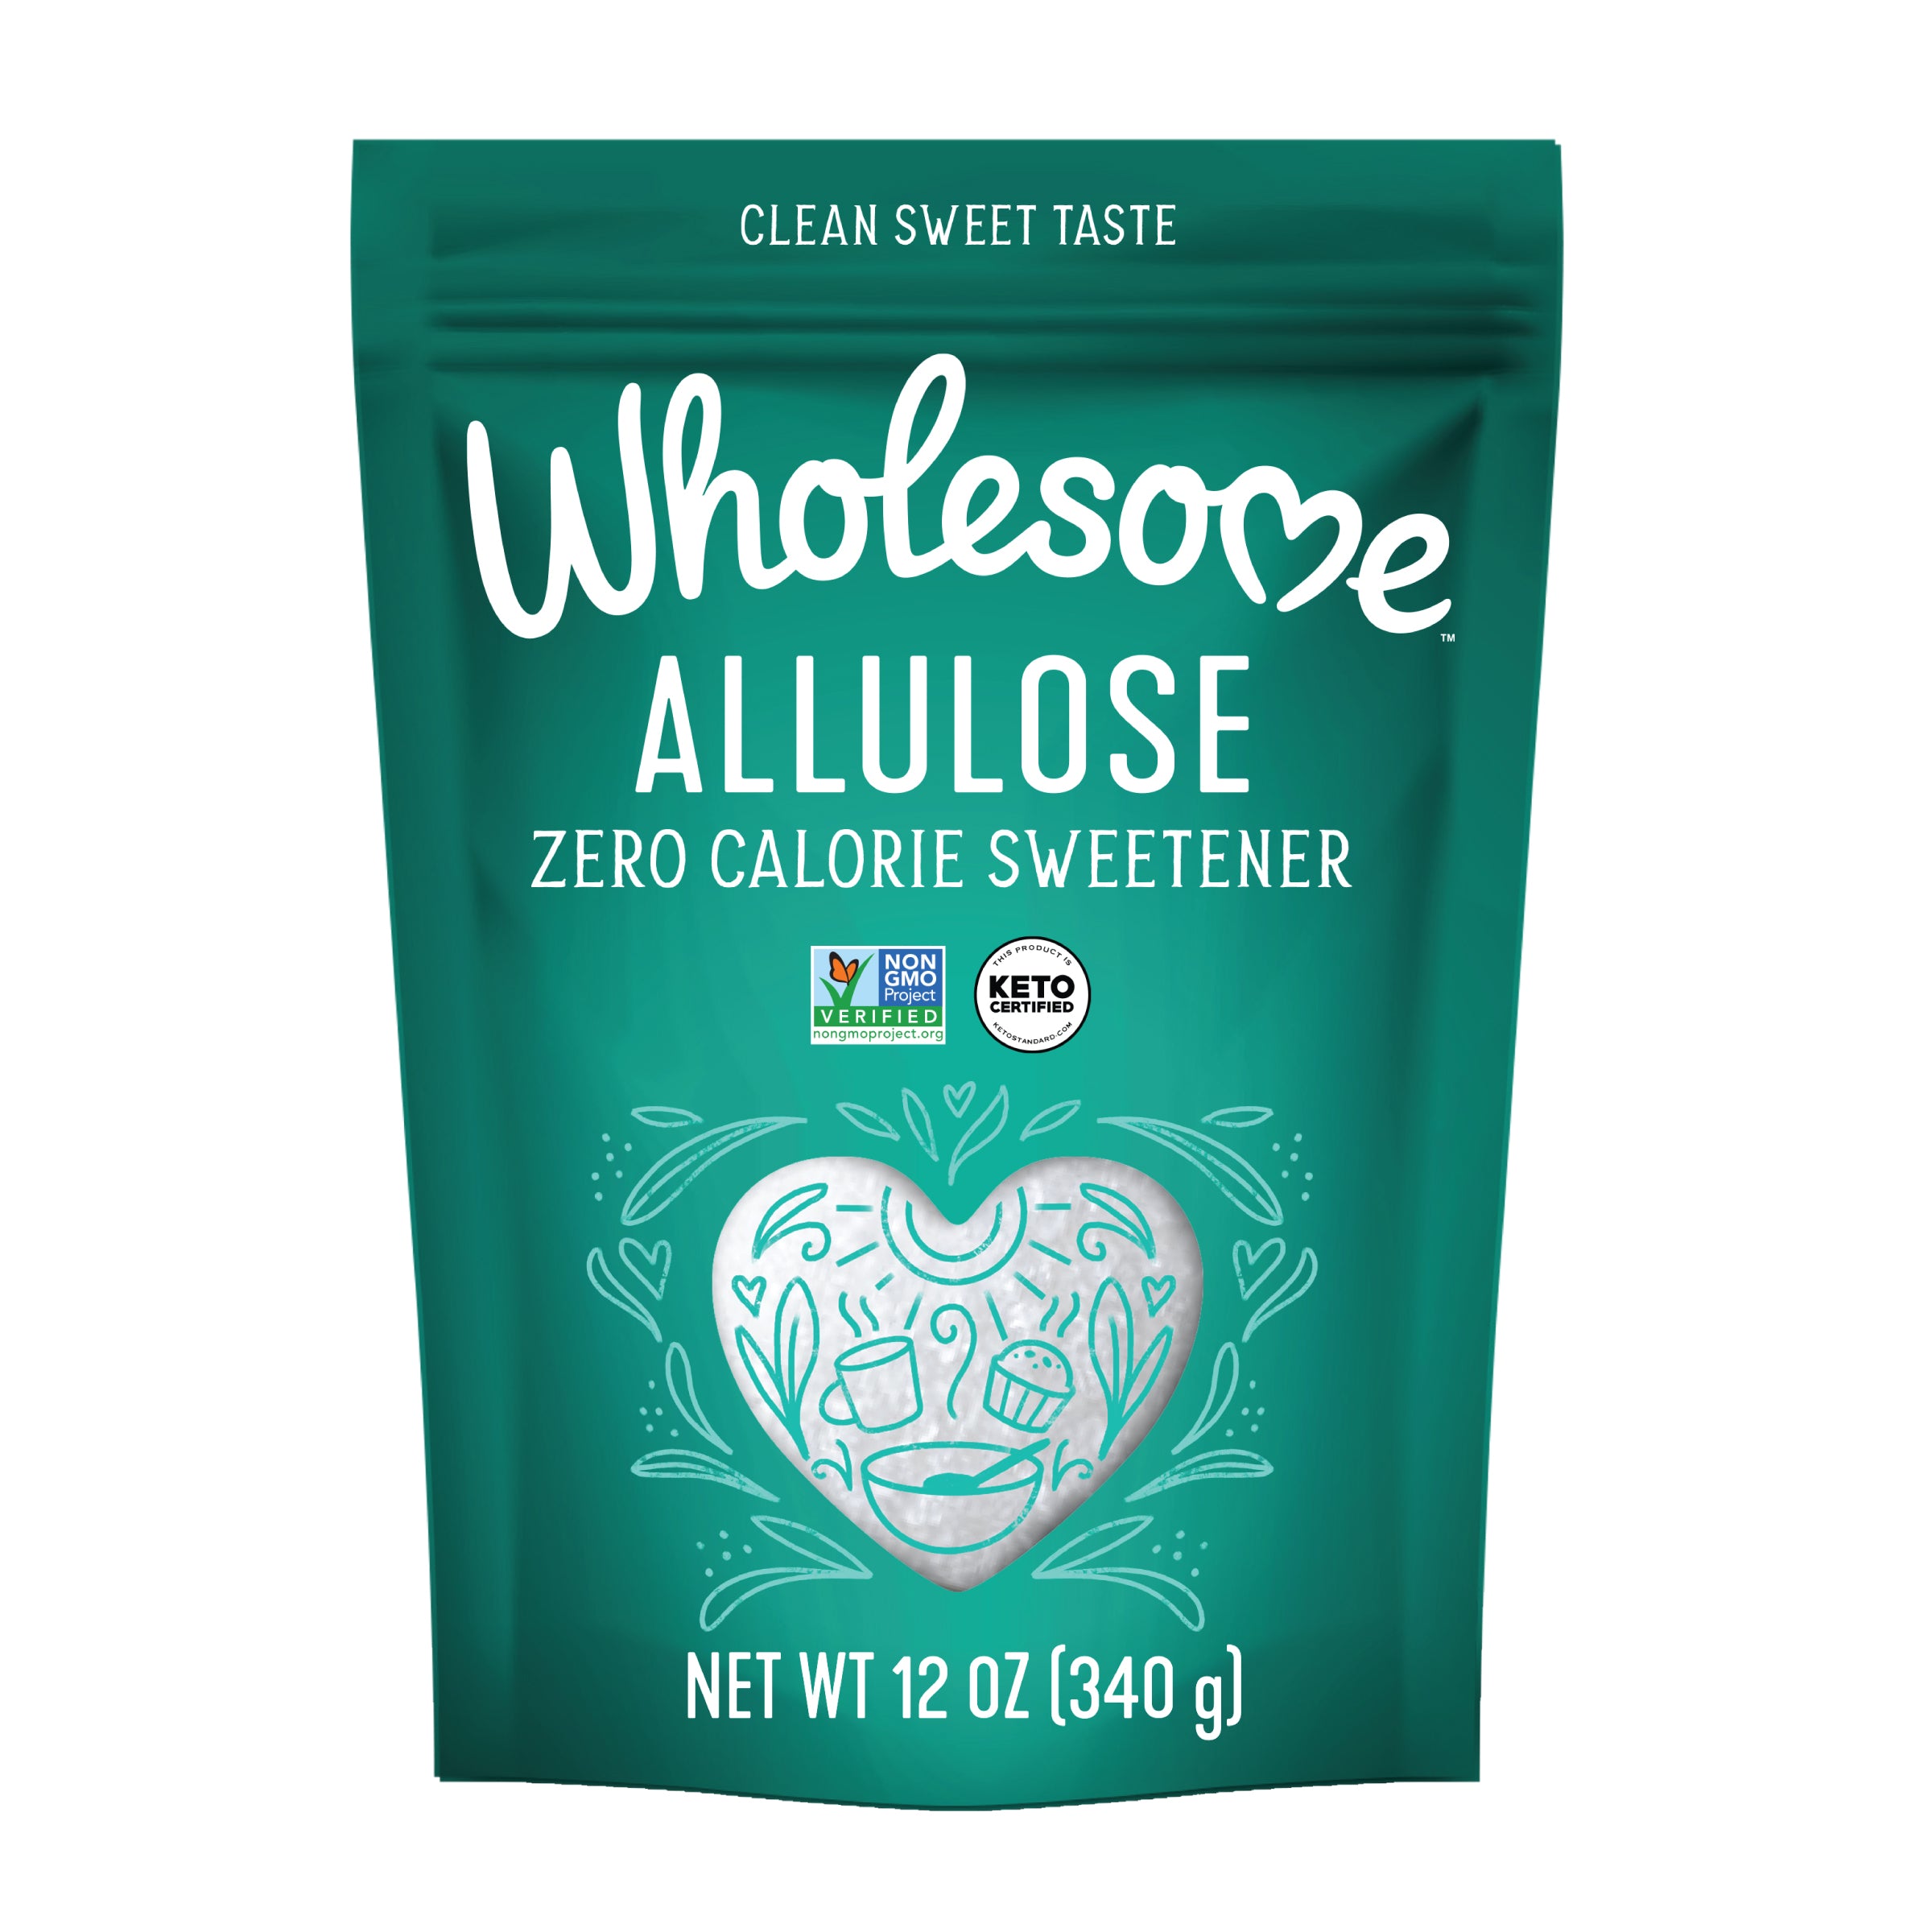 Wholesome Sweeteners Allulose Granulated Sweetener 12 oz by Wholesome  Sweeteners - Exclusive Offer at $8.39 on Netrition